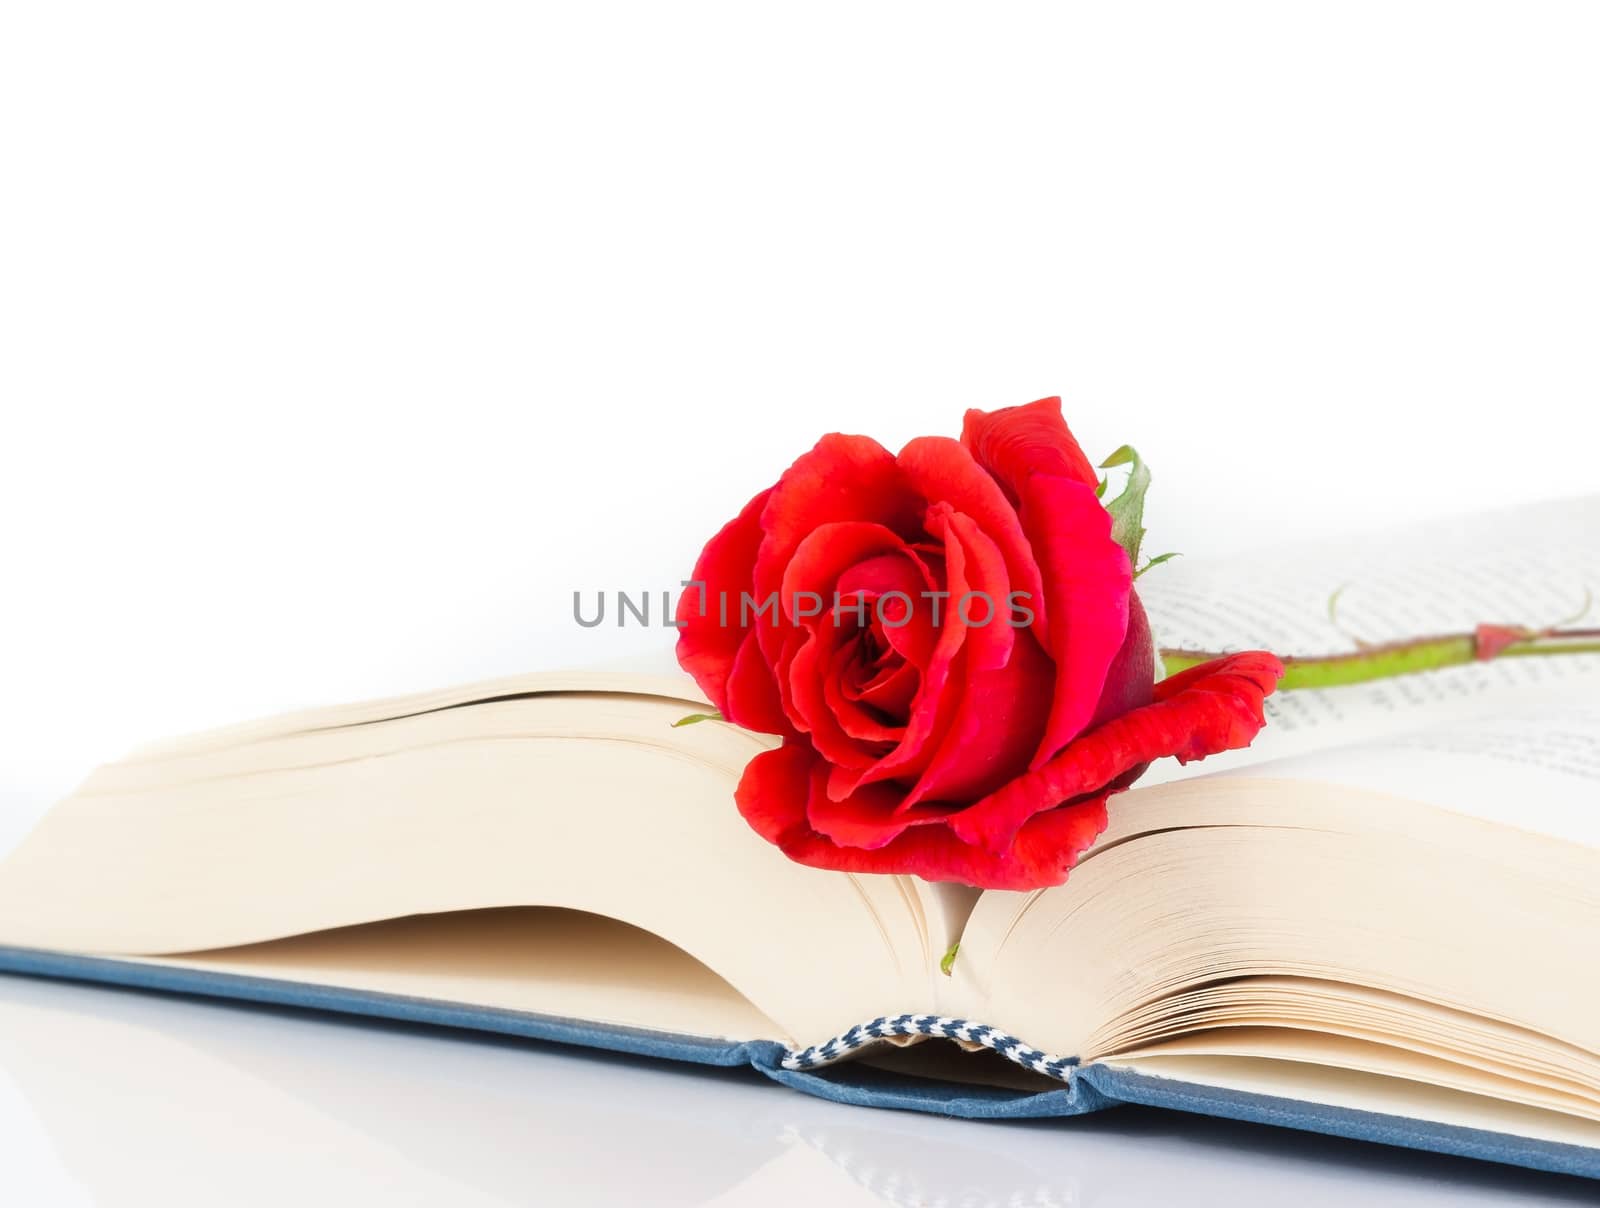 red rose on the book on white background by donfiore